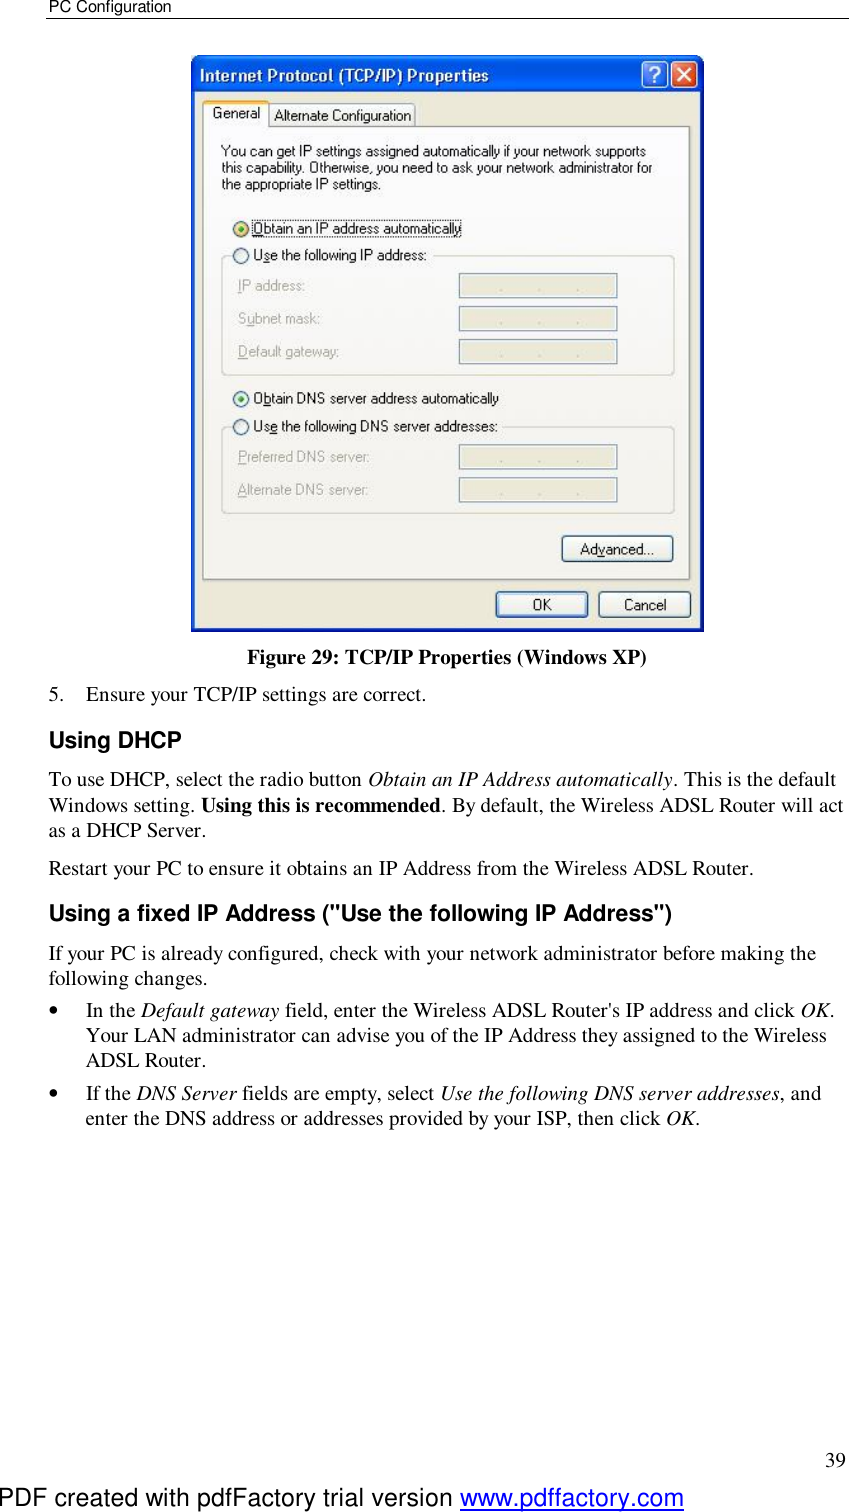 PC Configuration 39  Figure 29: TCP/IP Properties (Windows XP) 5. Ensure your TCP/IP settings are correct. Using DHCP To use DHCP, select the radio button Obtain an IP Address automatically. This is the default Windows setting. Using this is recommended. By default, the Wireless ADSL Router will act as a DHCP Server. Restart your PC to ensure it obtains an IP Address from the Wireless ADSL Router. Using a fixed IP Address (&quot;Use the following IP Address&quot;) If your PC is already configured, check with your network administrator before making the following changes. •  In the Default gateway field, enter the Wireless ADSL Router&apos;s IP address and click OK. Your LAN administrator can advise you of the IP Address they assigned to the Wireless ADSL Router. •  If the DNS Server fields are empty, select Use the following DNS server addresses, and enter the DNS address or addresses provided by your ISP, then click OK.  PDF created with pdfFactory trial version www.pdffactory.com